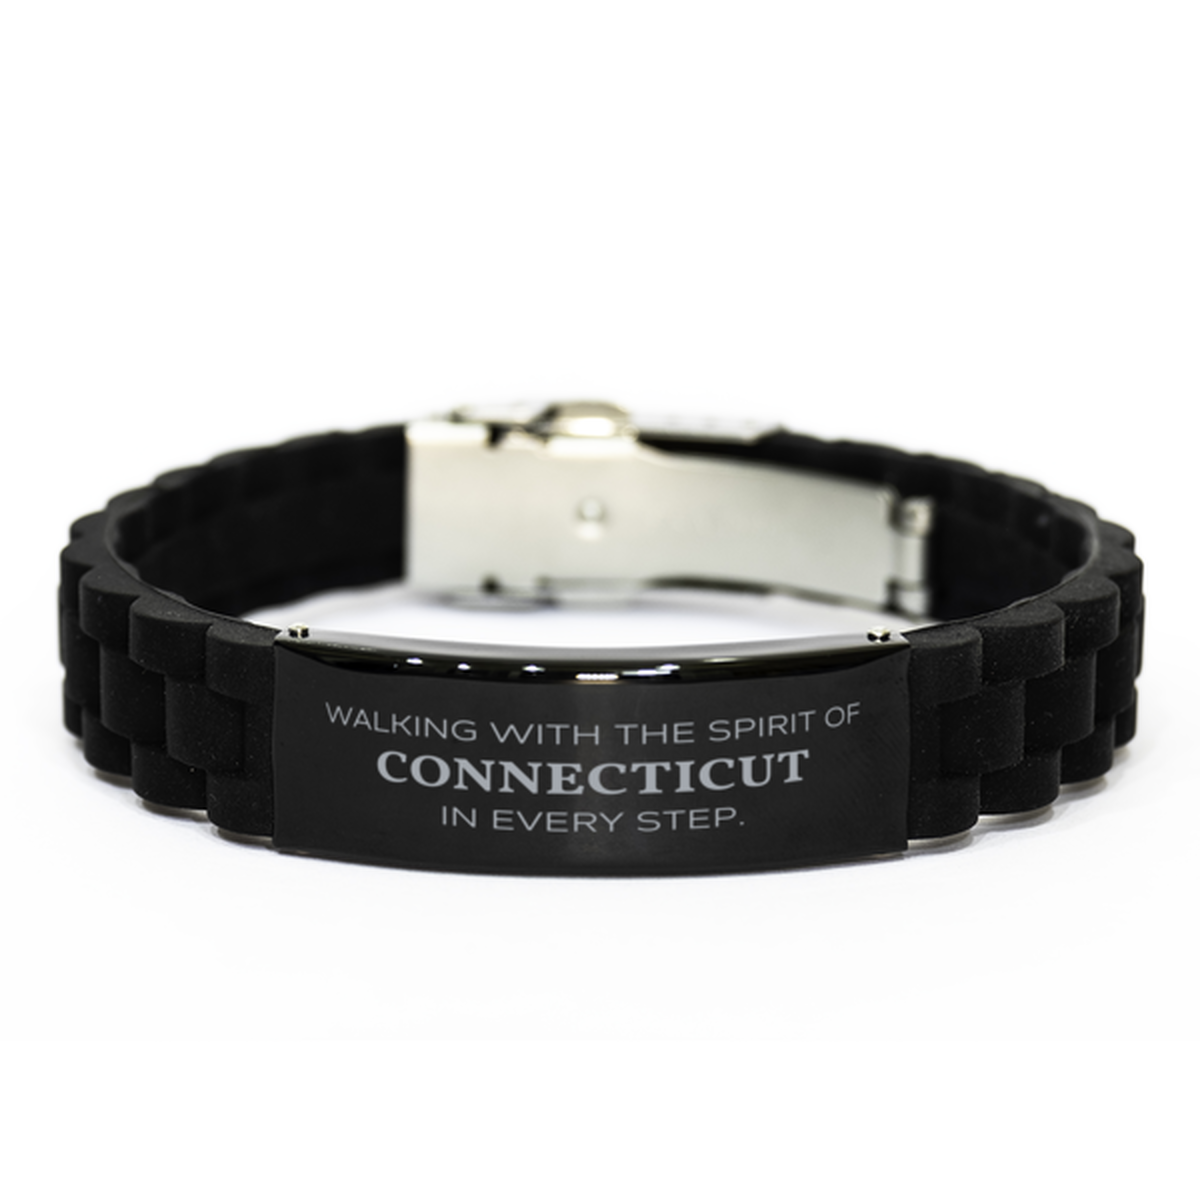 Connecticut Gifts, Walking with the spirit, Love Connecticut Birthday Christmas Black Glidelock Clasp Bracelet For Connecticut People, Men, Women, Friends